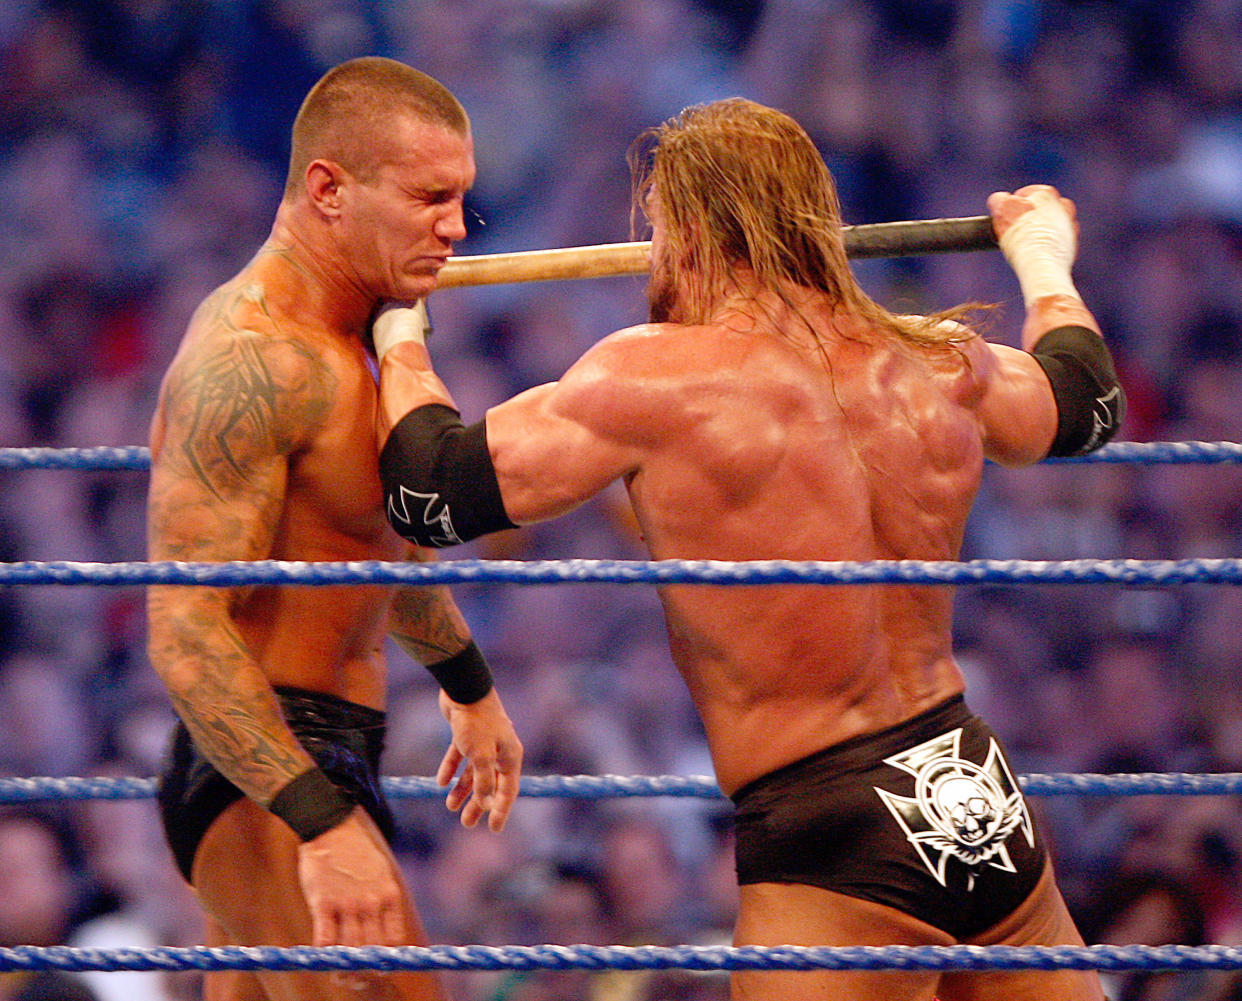 HOUSTON - APRIL 05: Triple H hits Randy Orton with a sledgehammer during their WWE Championship match at 